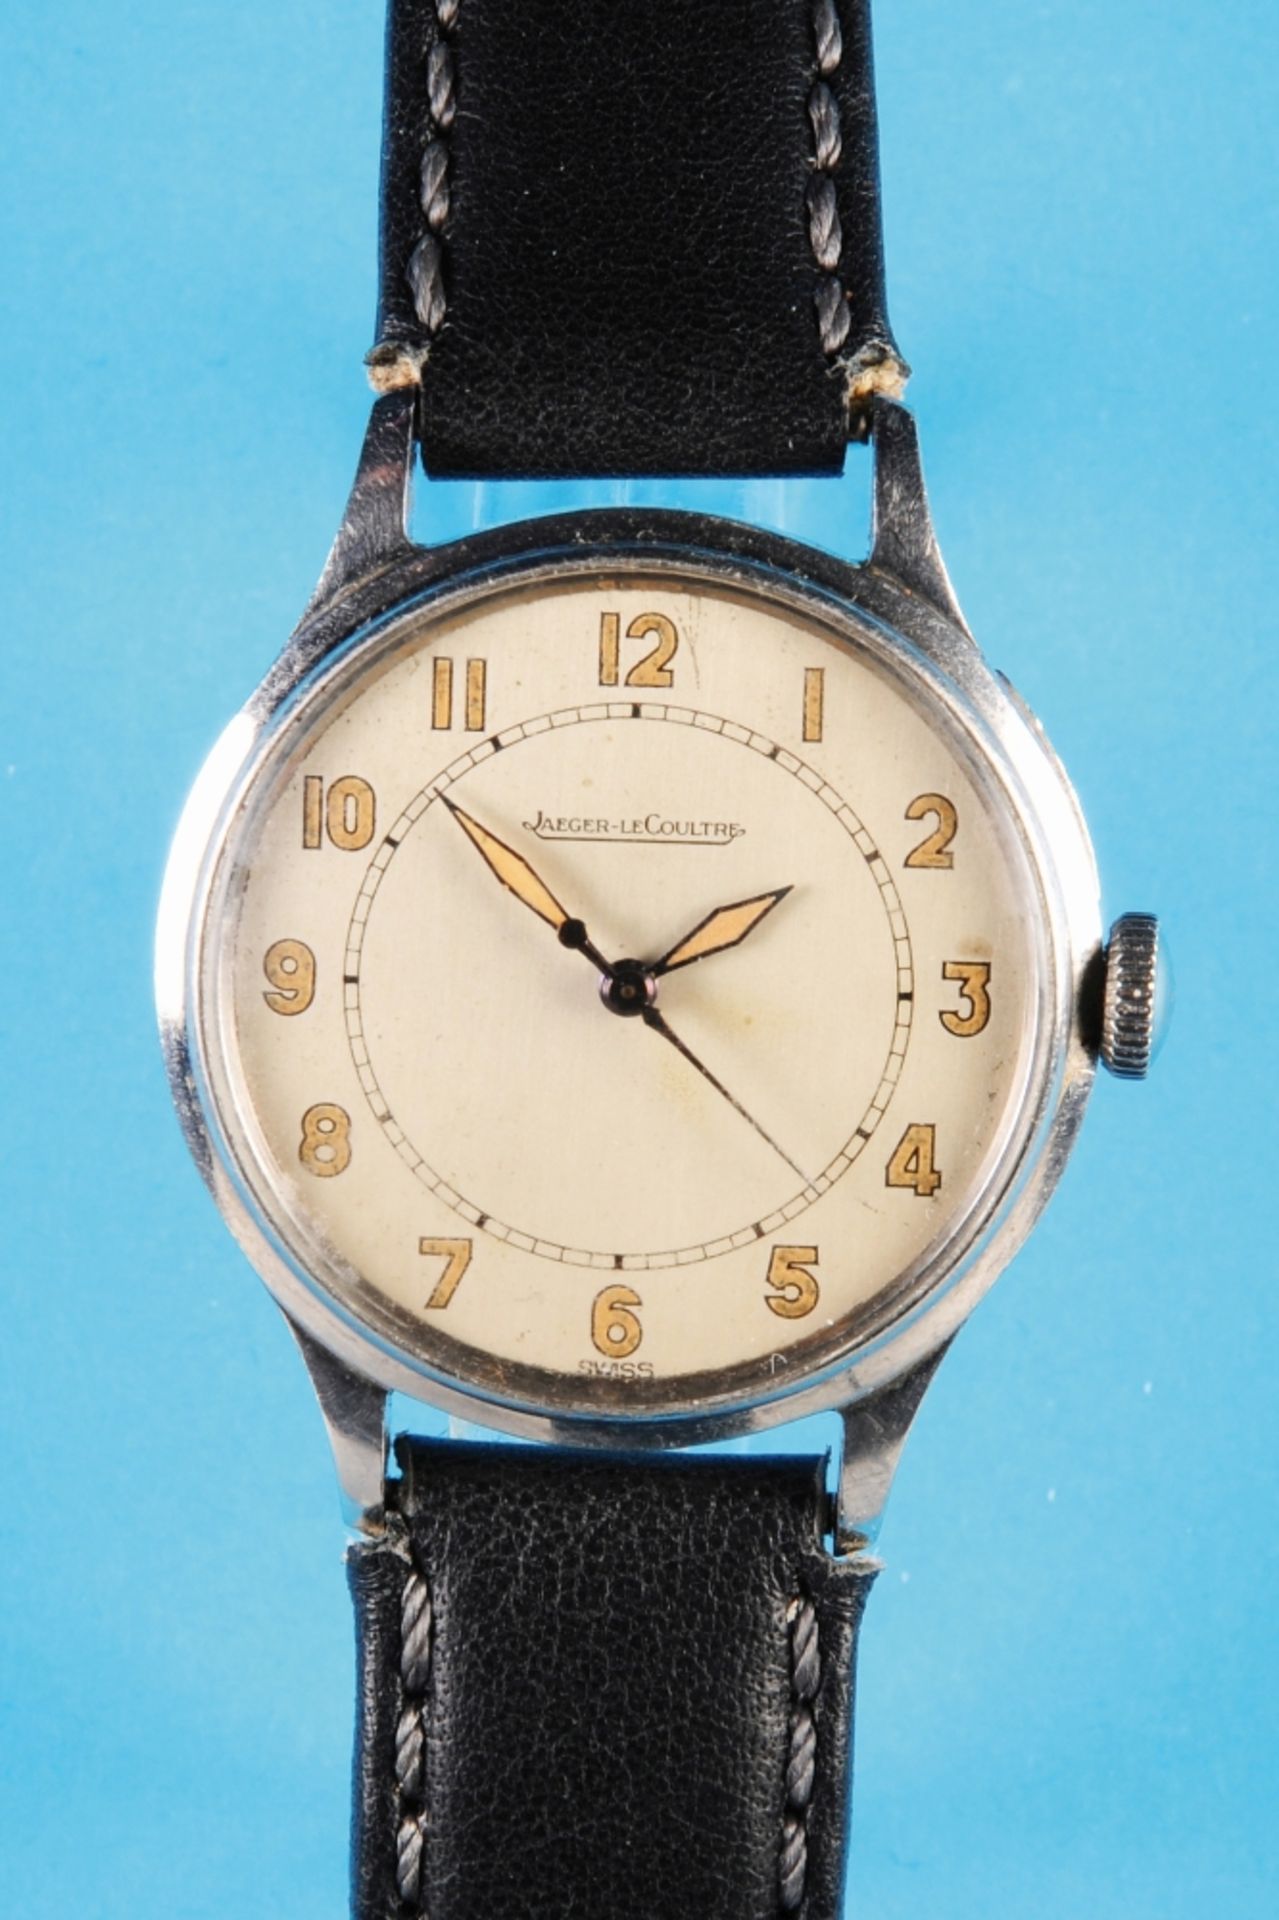 Jaeger-LeCoultre Military Vintage steel wristwatch with center seconds, cal. P478, 1940s, case with